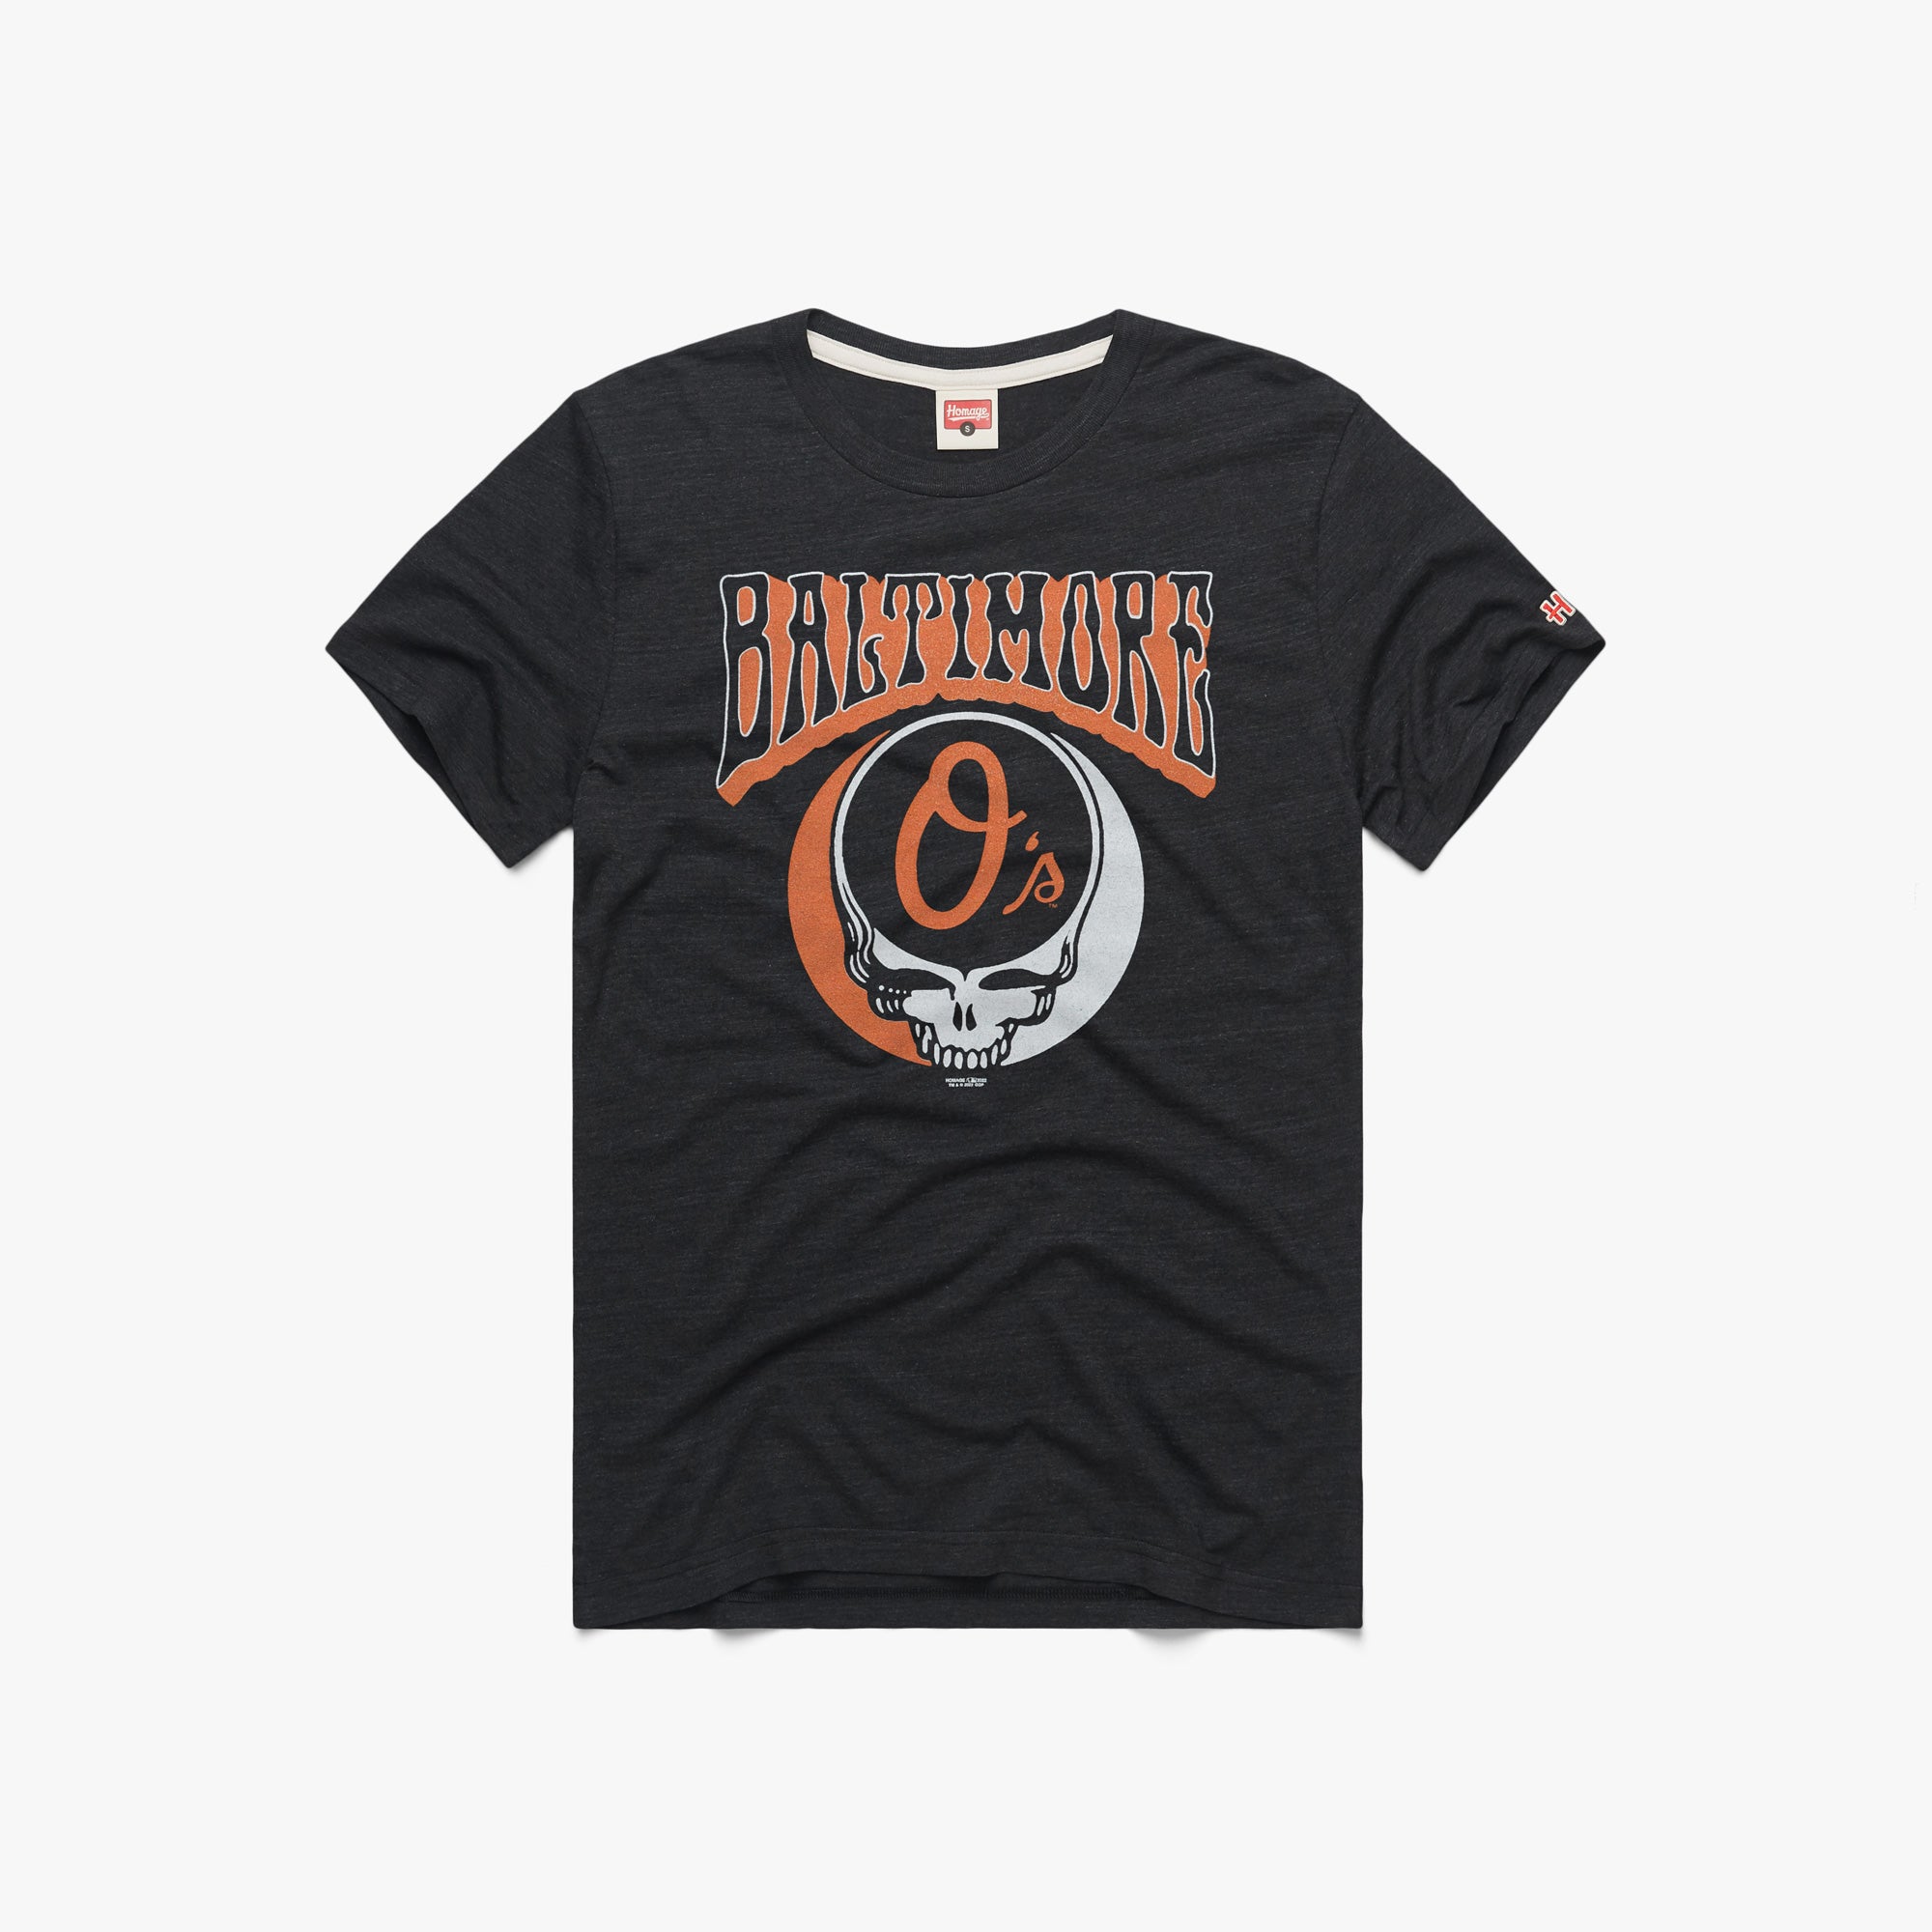 MLB x Grateful Dead x Orioles T-Shirt from Homage. | Charcoal | Vintage Apparel from Homage.